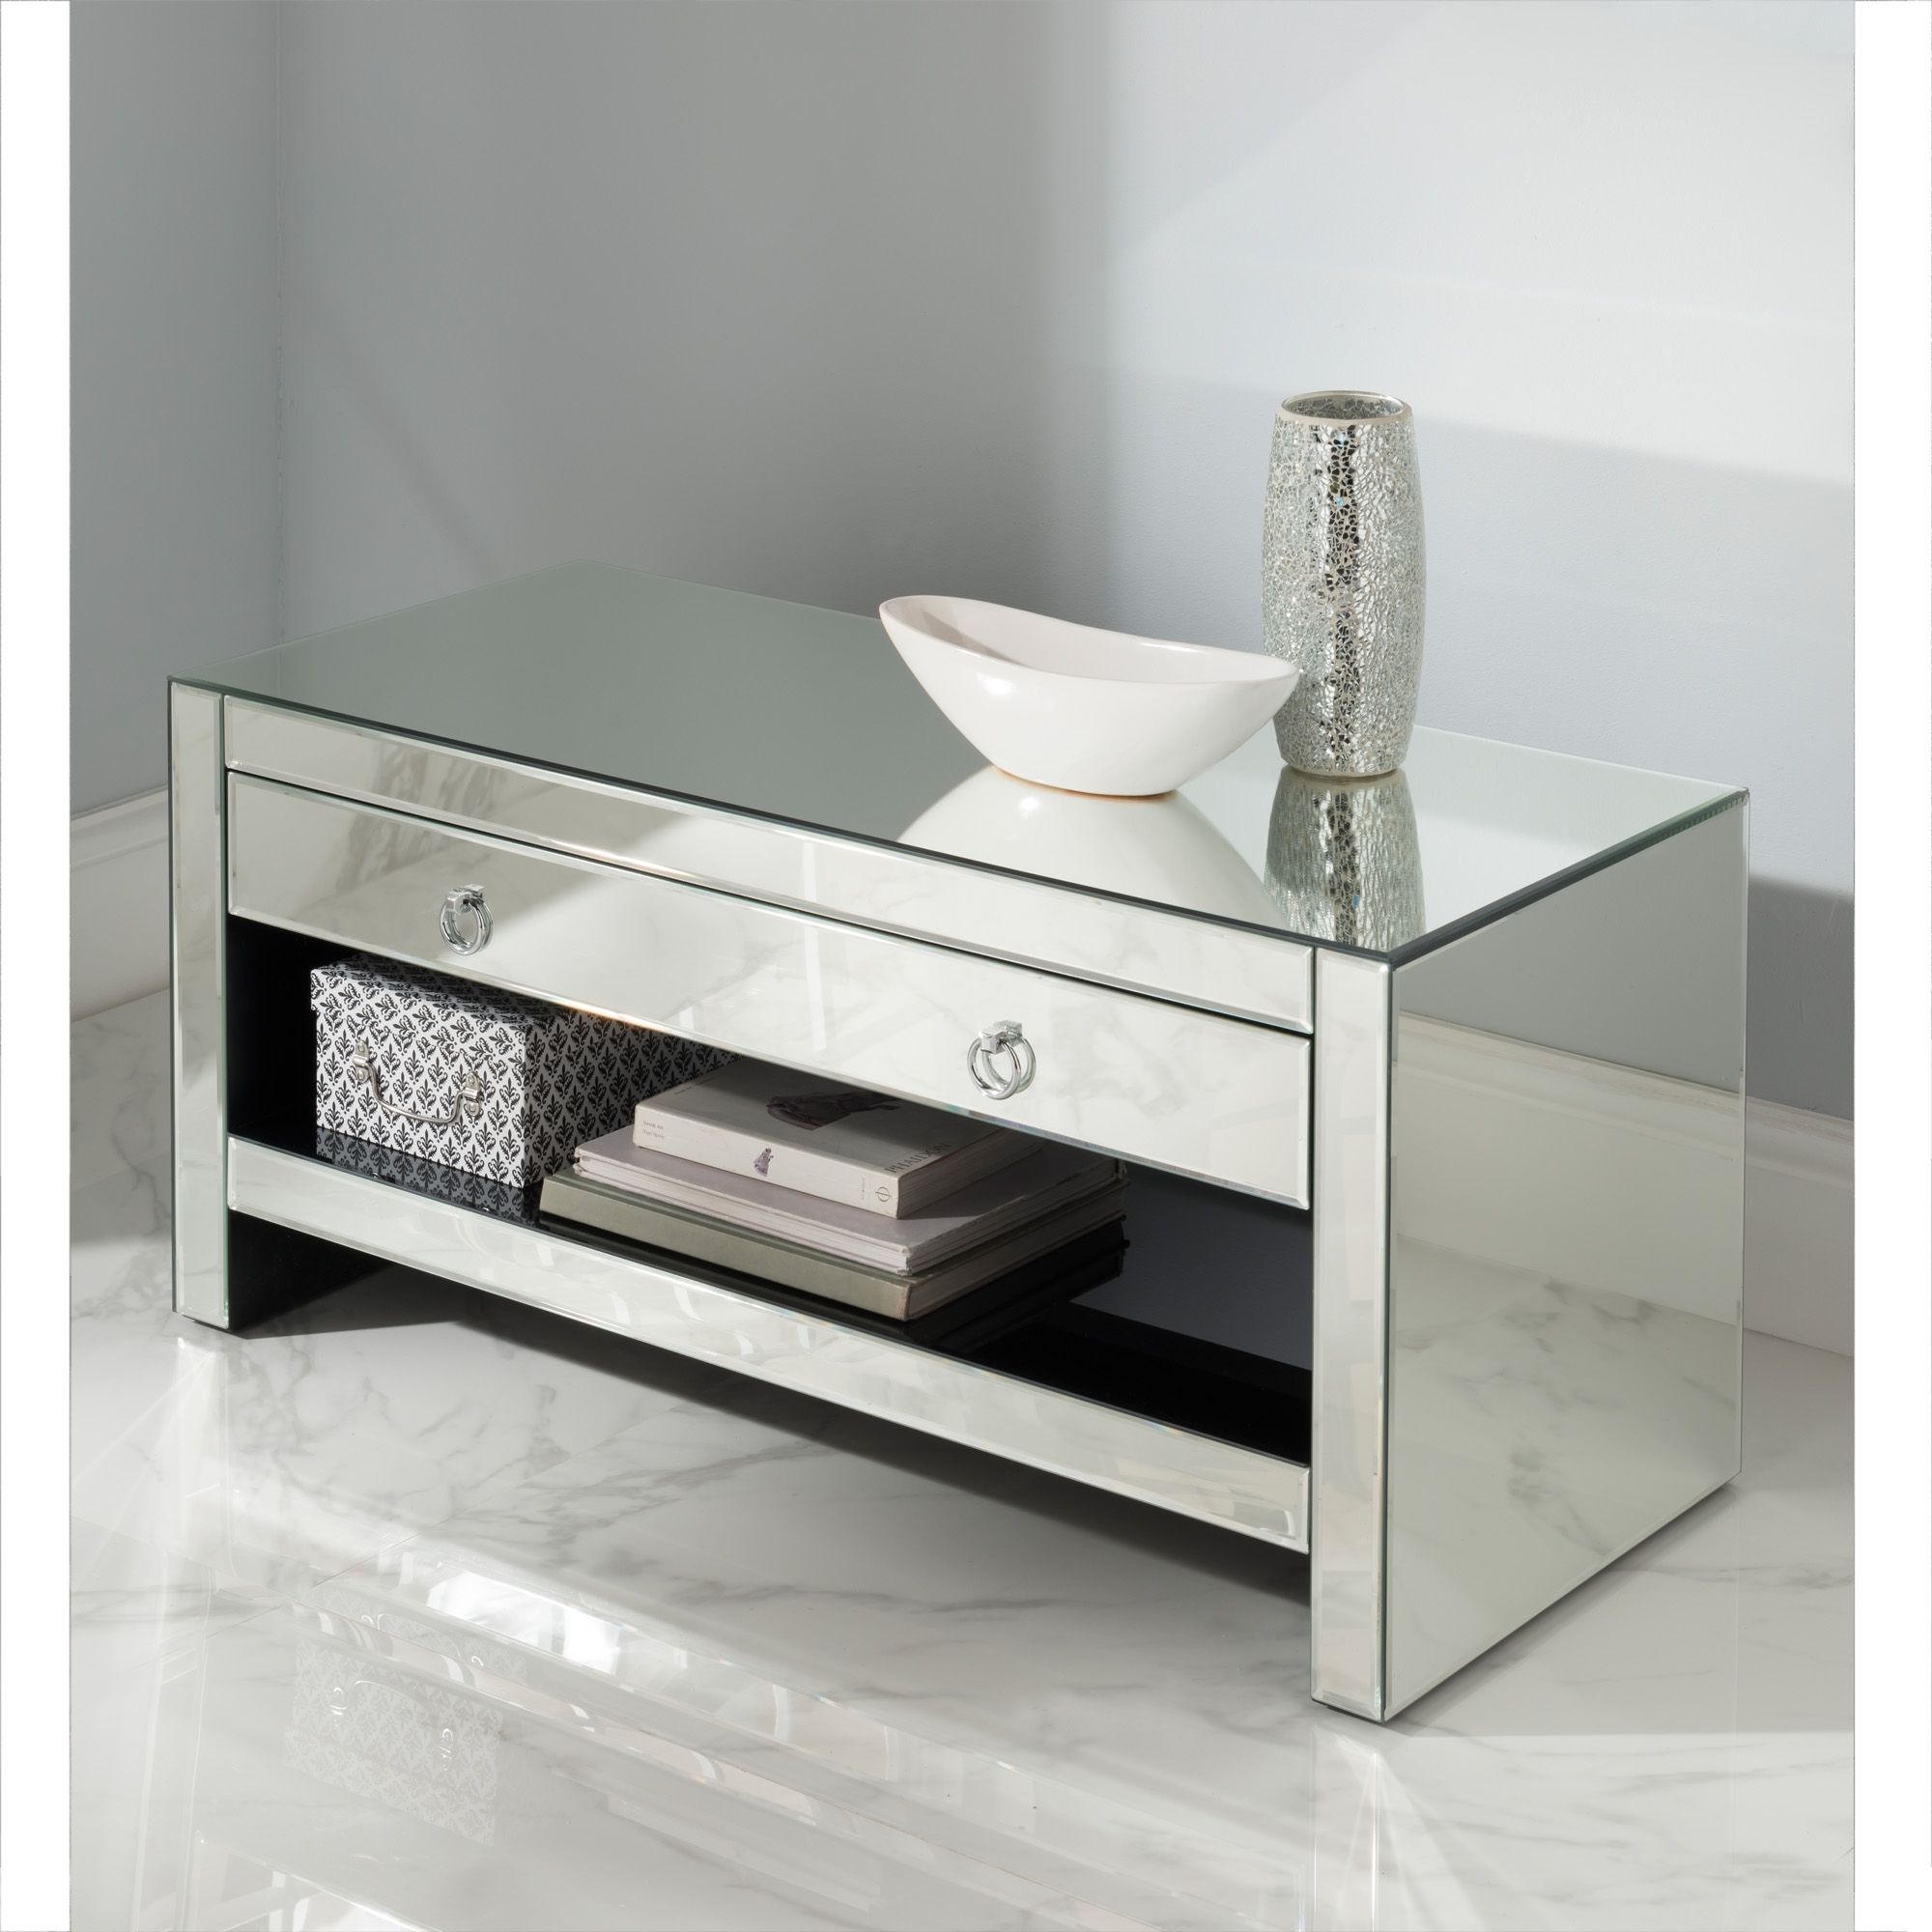 Mirrored Tv Cabinet | Glass Venetian Furniture Intended For Fitzgerald Mirrored Tv Stands (View 4 of 20)